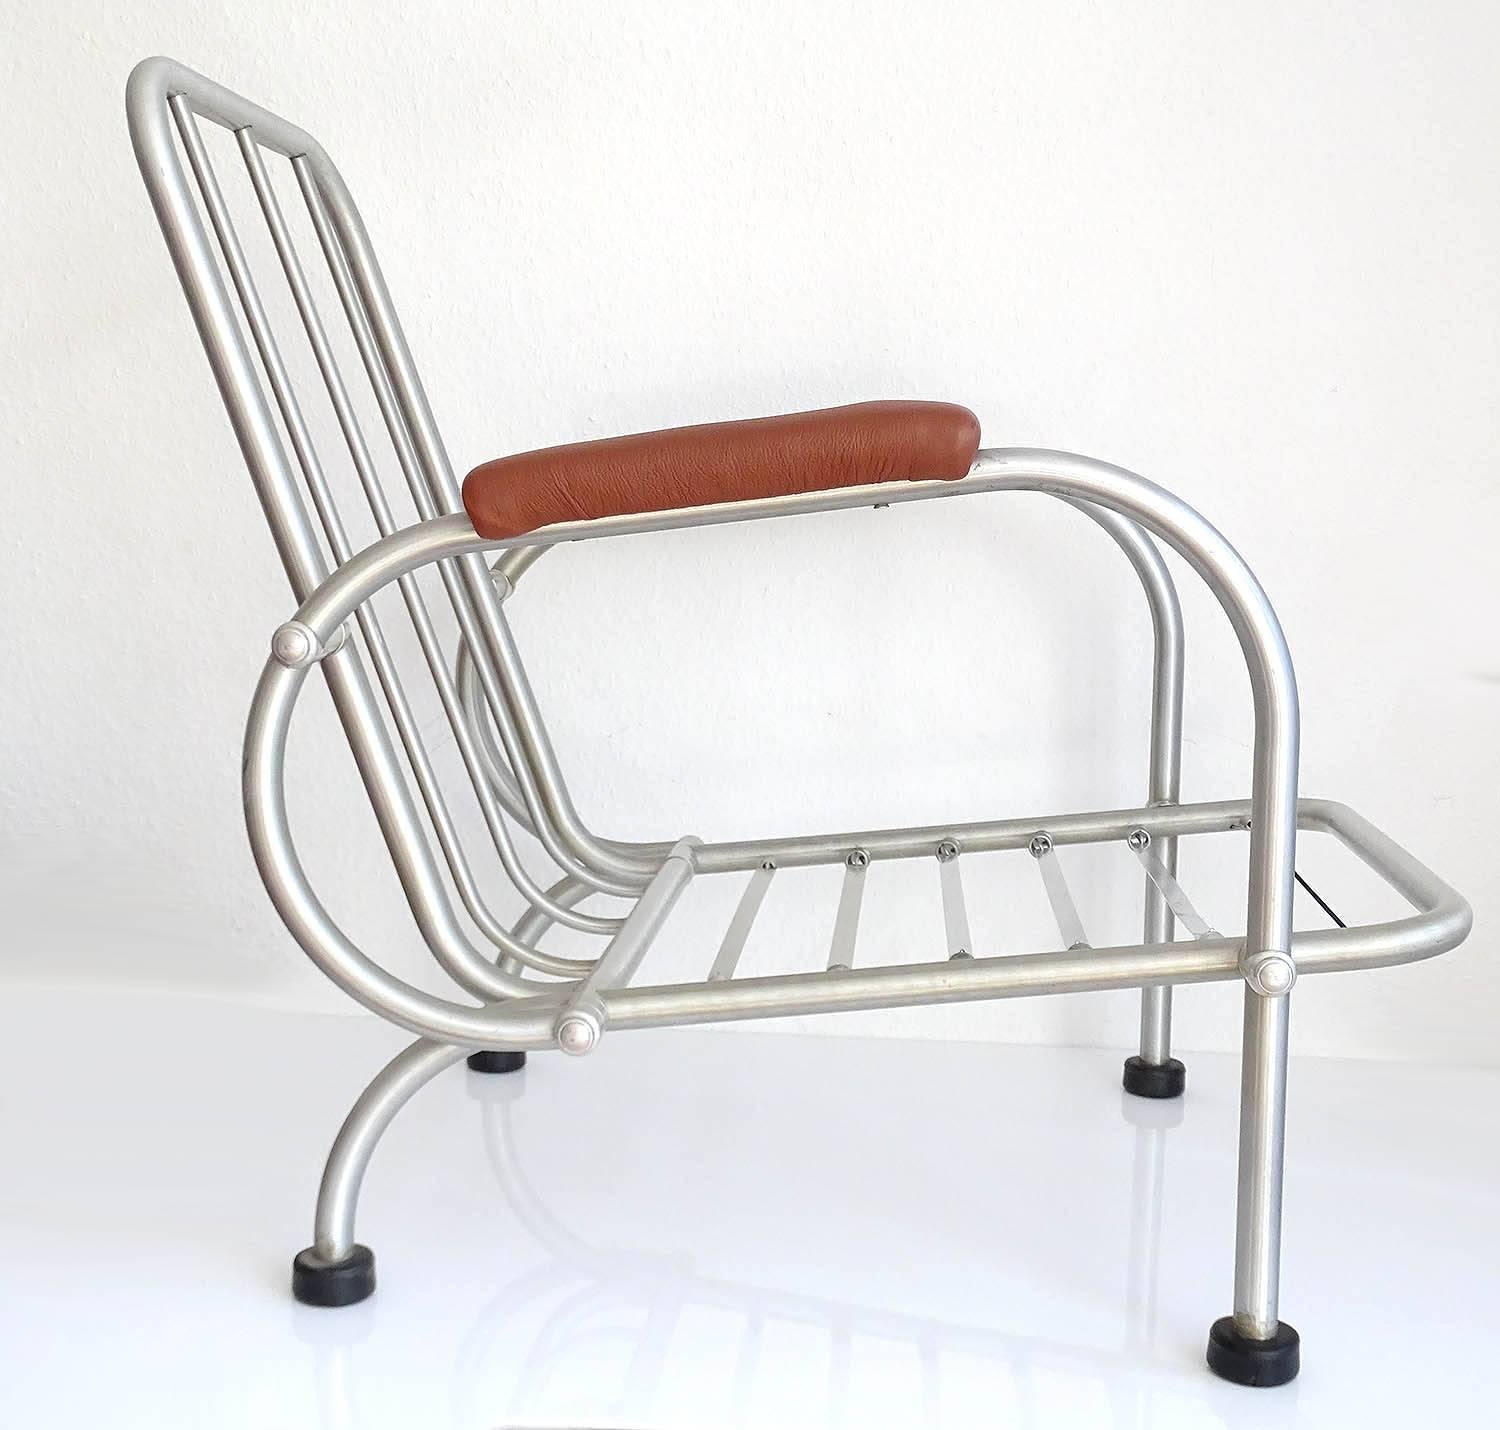  Pair of 1930s Art Deco Warren McArthur Lounge Chairs For Sale 6